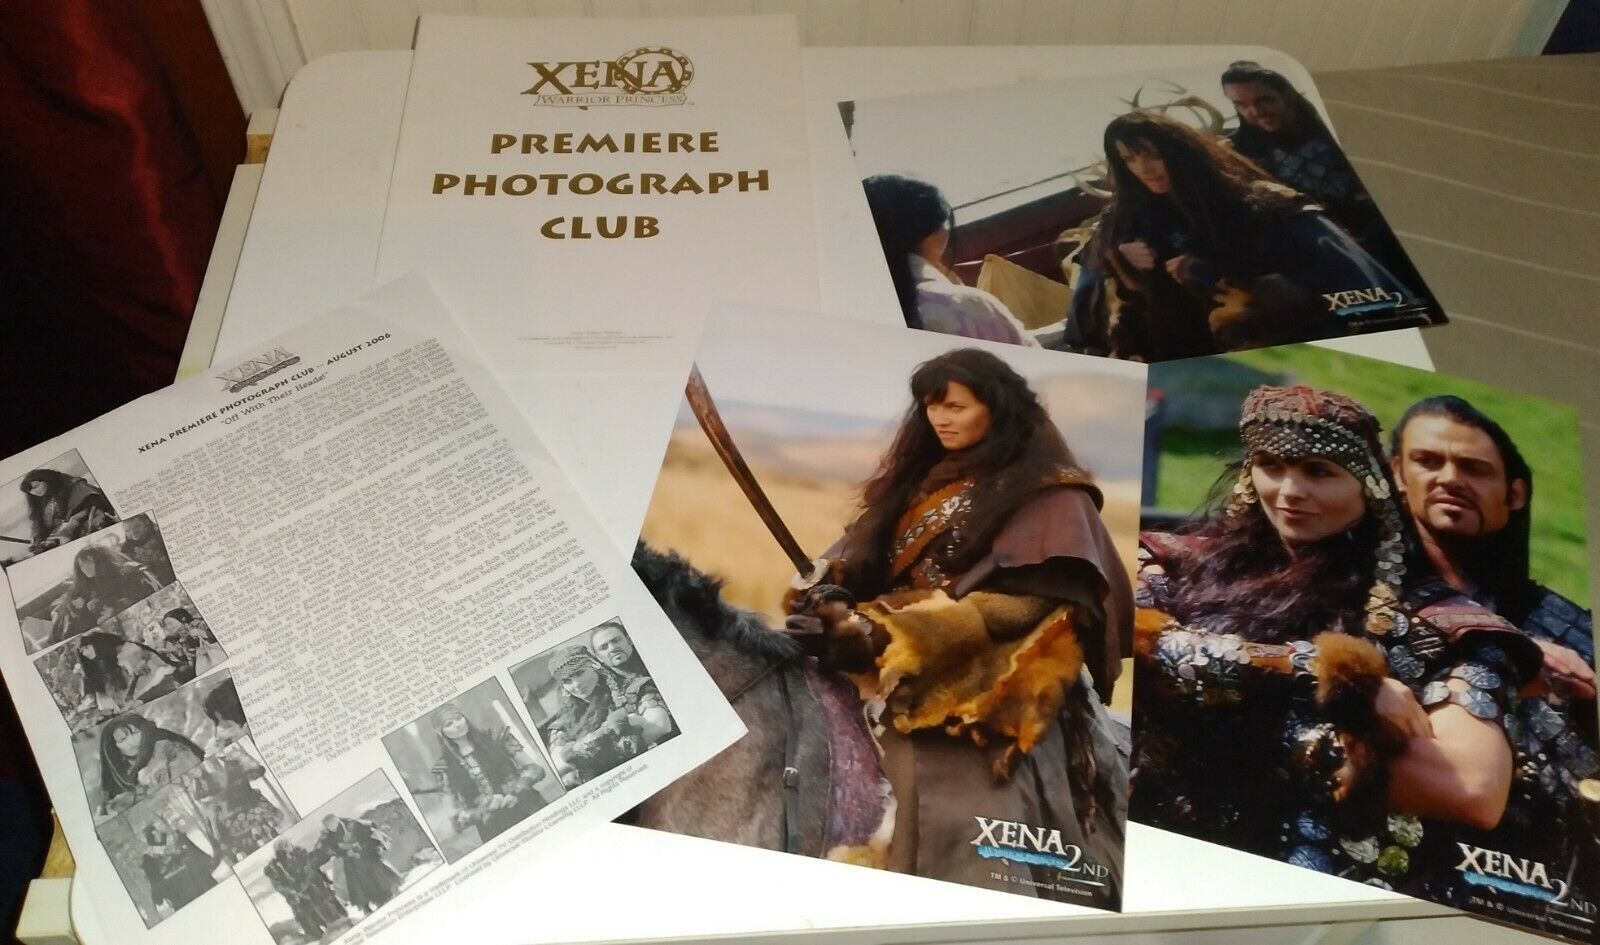 Xena Premiere Photo Club August 2006 "off With Their Heads!" Picture Set Of 8